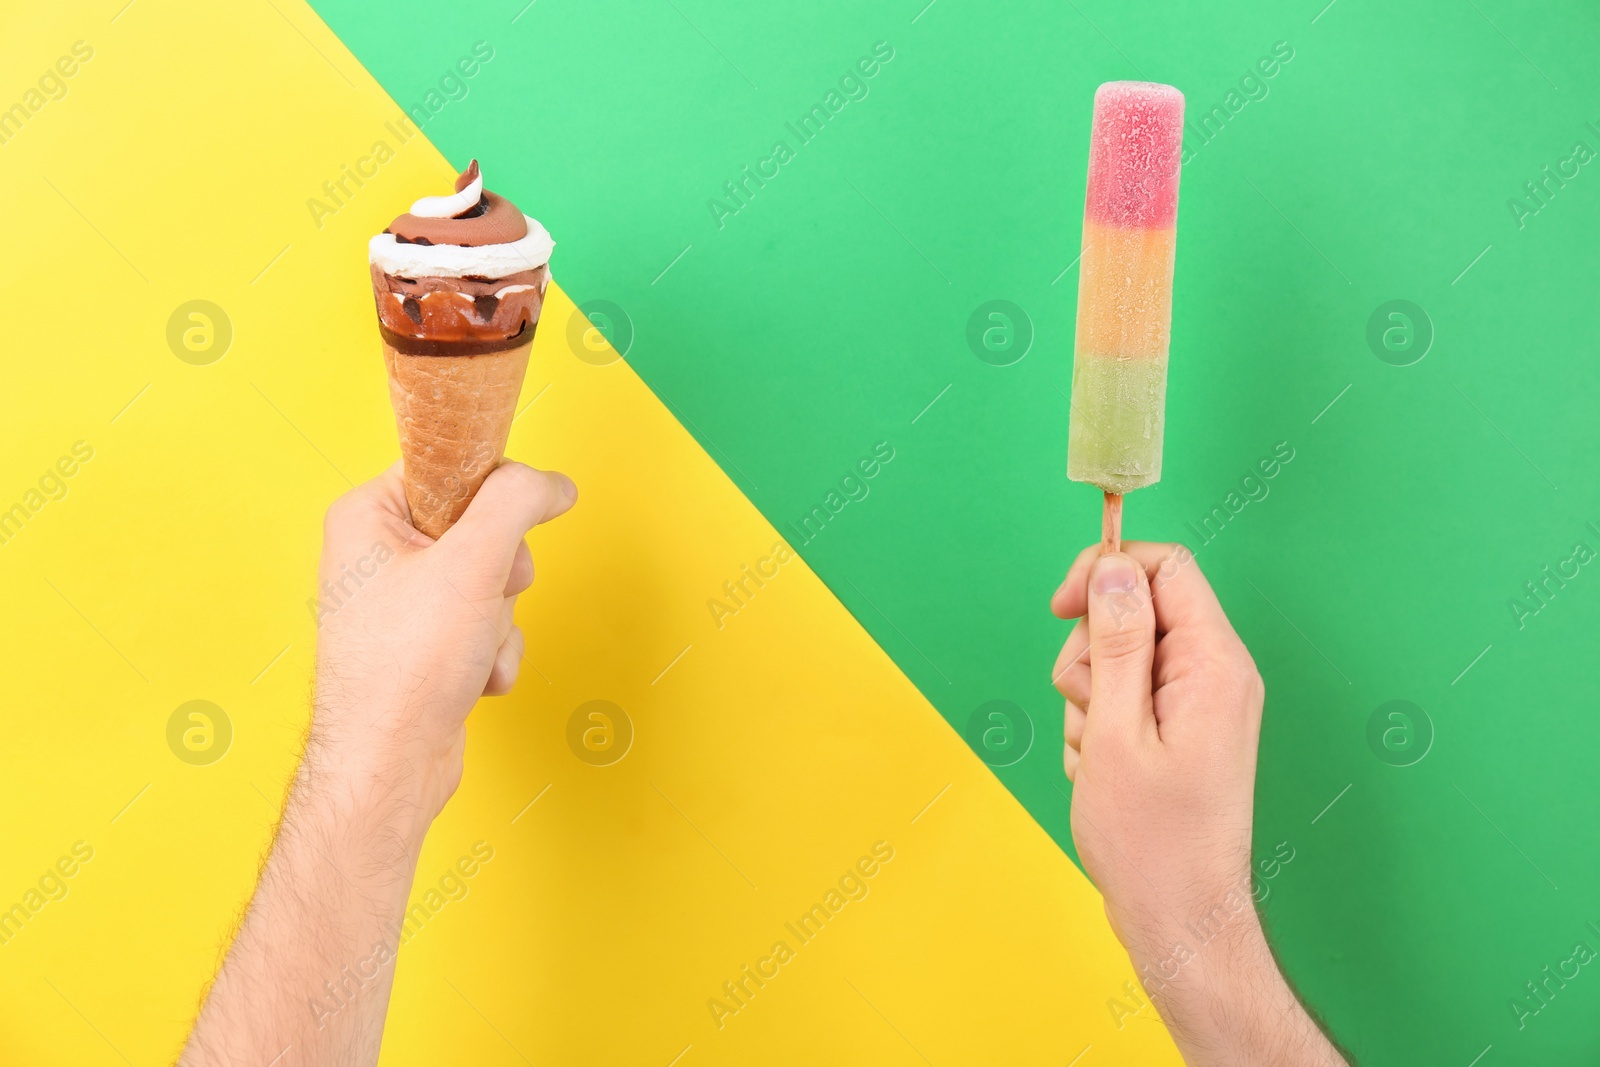 Photo of Man holding ice cream cone and popsicle on color background. Focus on hands